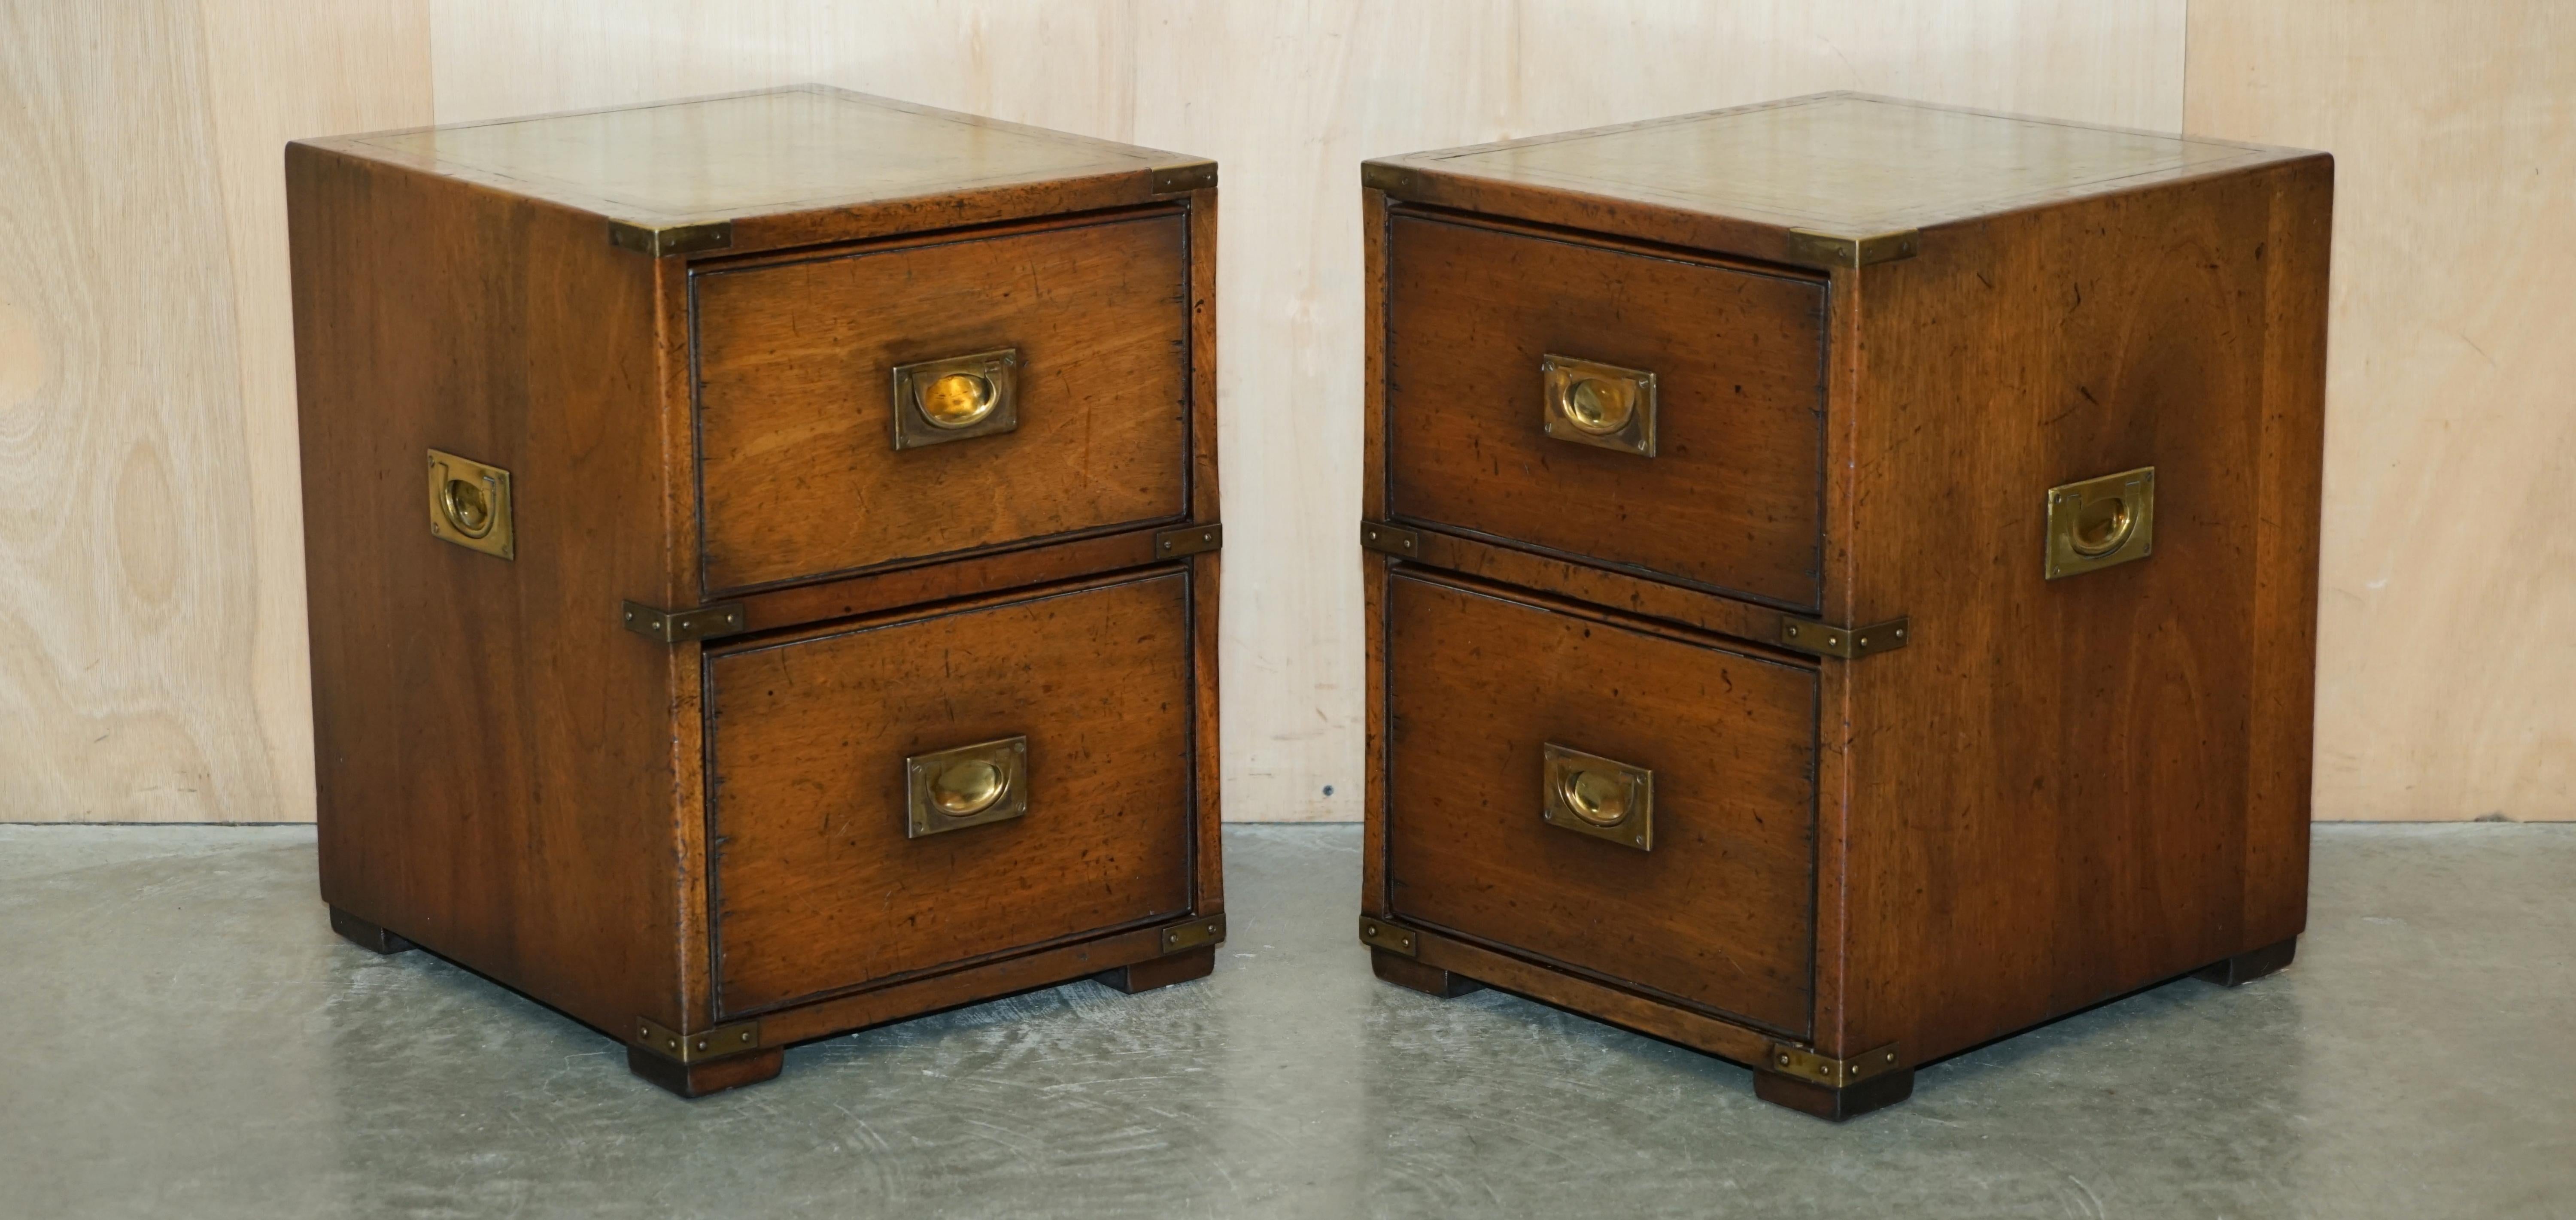 Royal House Antiques

Royal House Antiques is delighted to offer for sale this stunning pair of hand made in England, retailed through Harrods London, Military Campaign bedside table sized chests of drawers with green leather tops 

Please note the